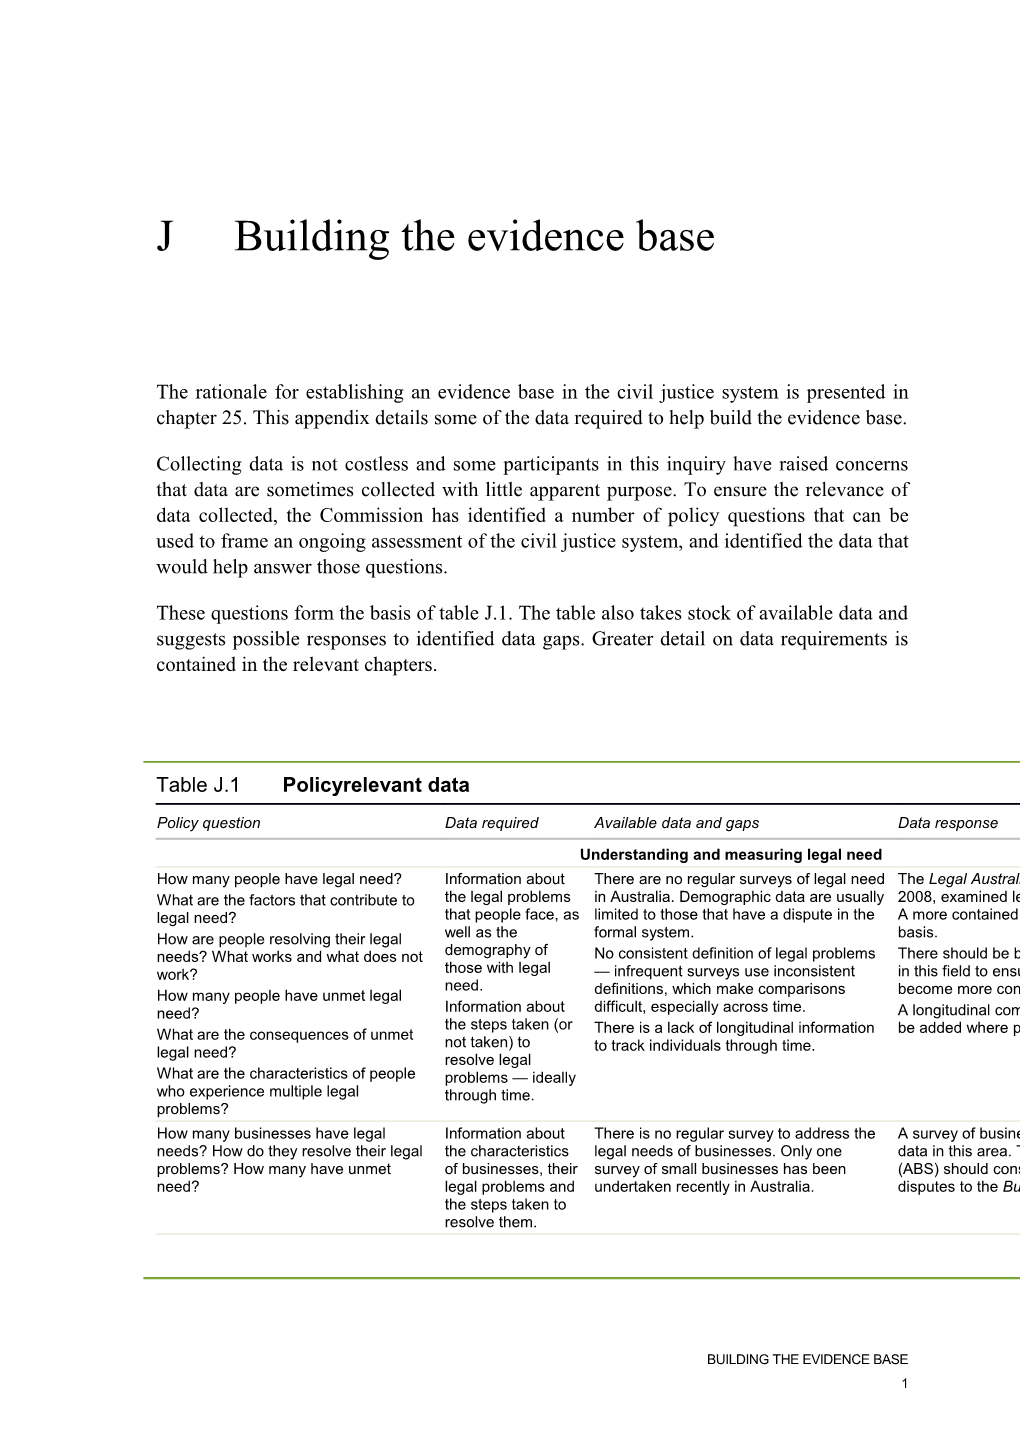 Building the Evidence Base